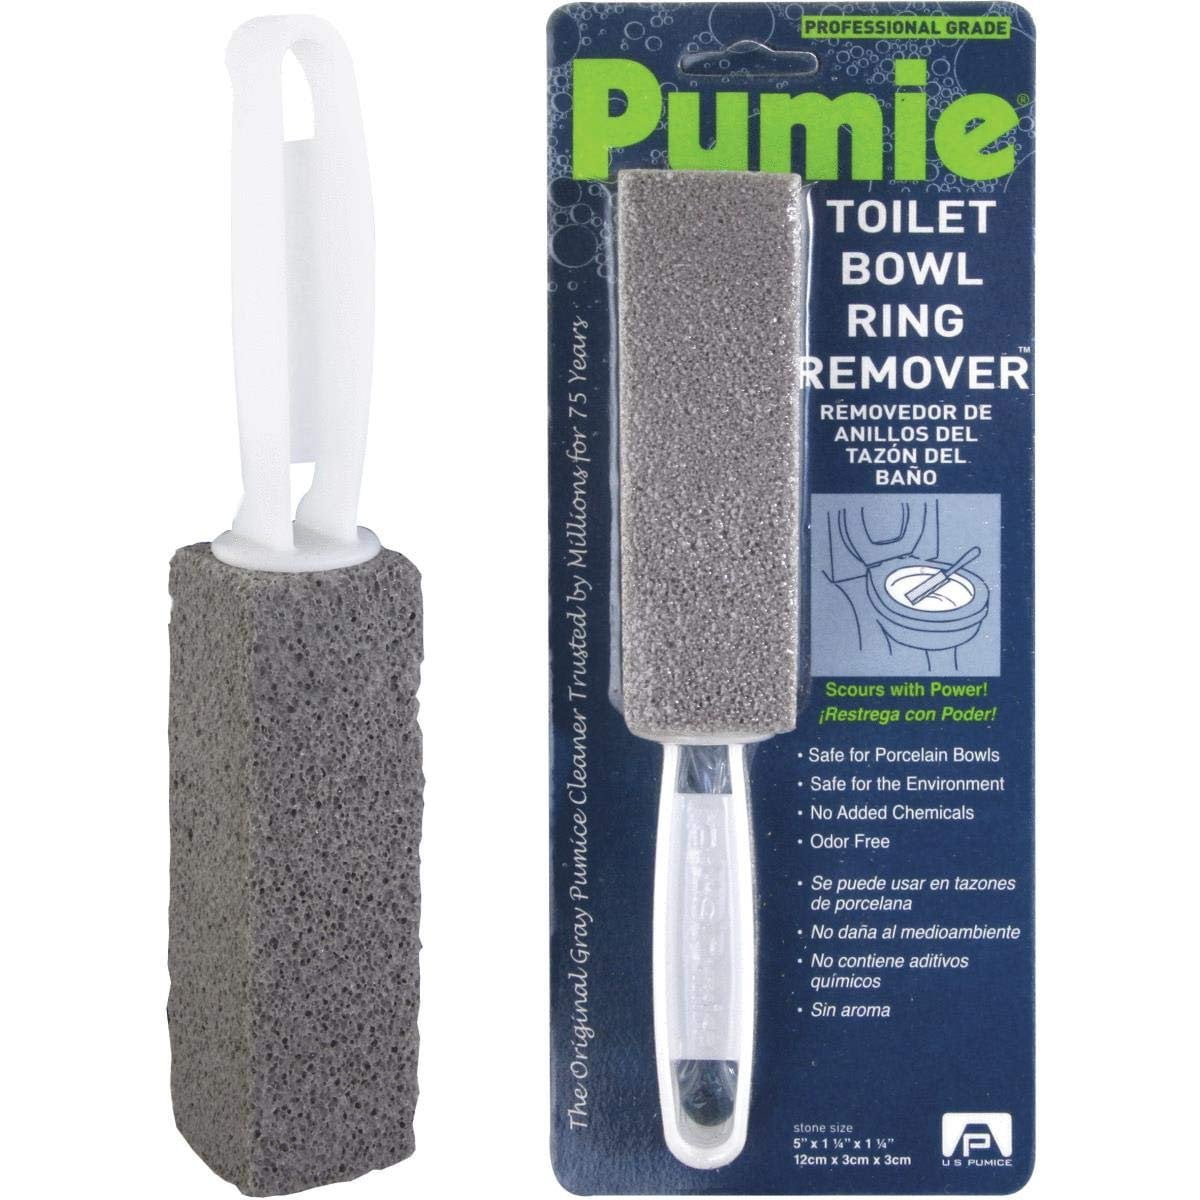 Pumie Toilet Bowl Ring Remover #TBR-6 